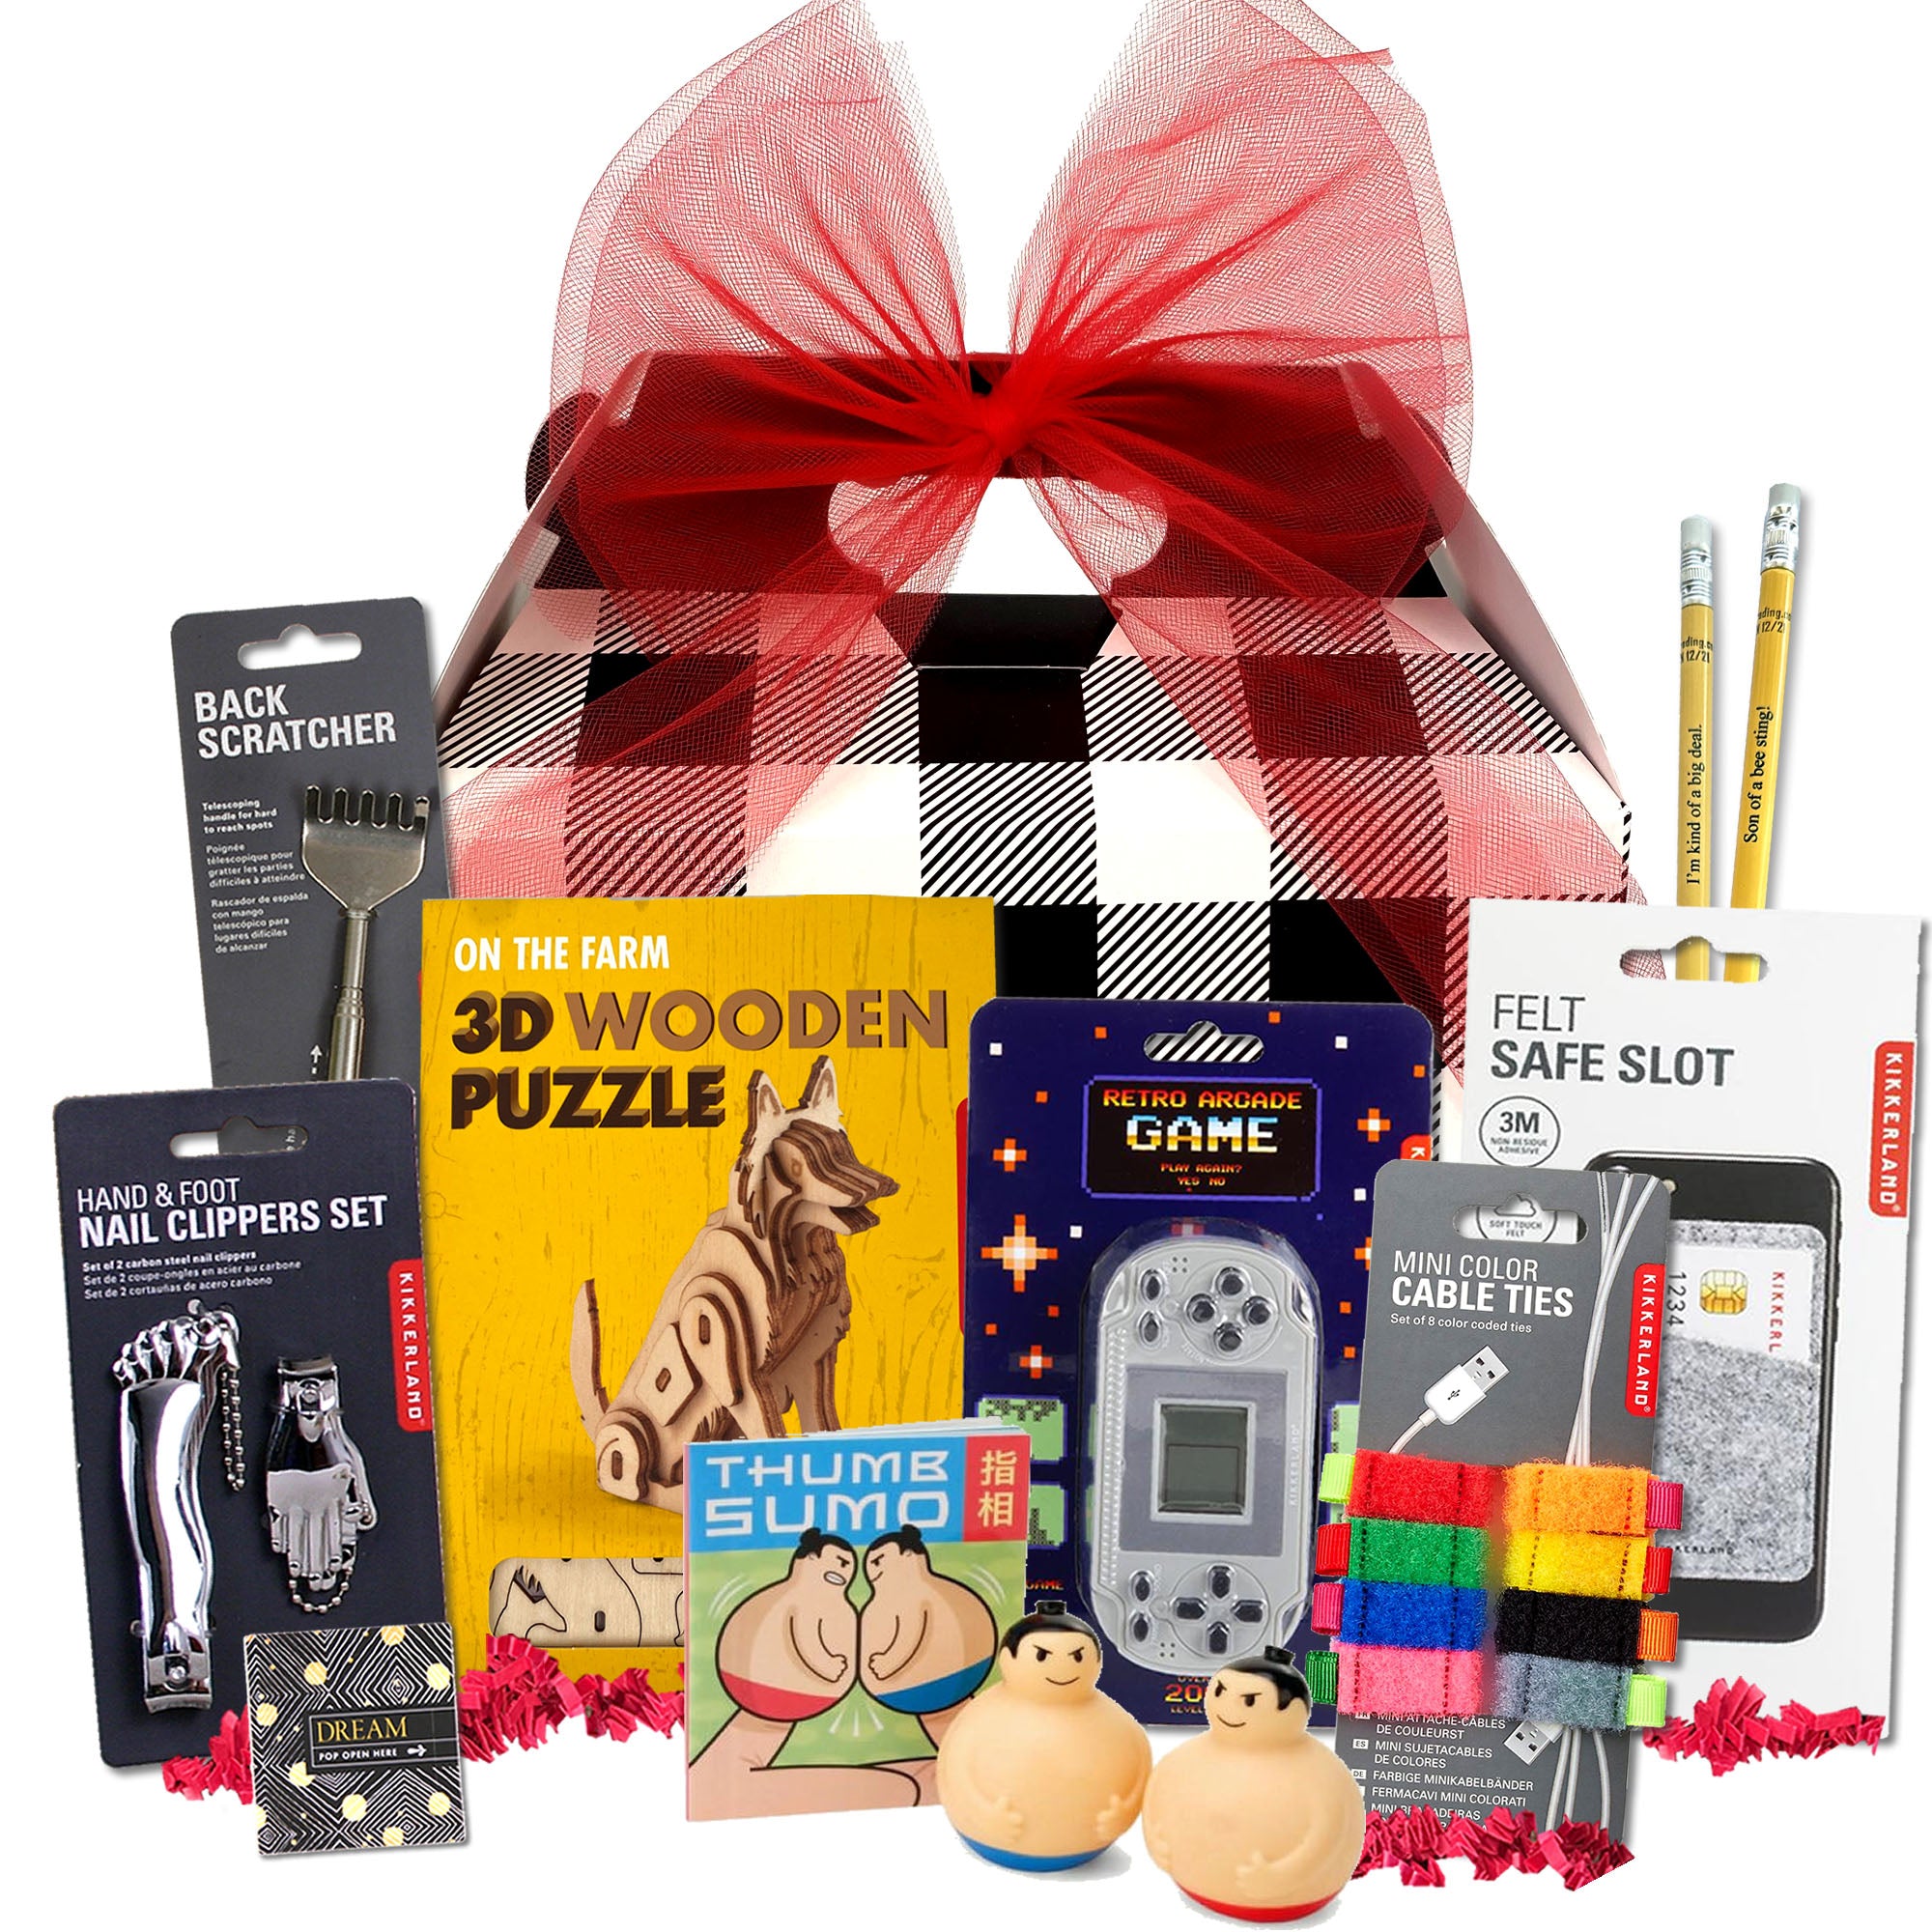 Rule the Cool Guy's Gift Basket